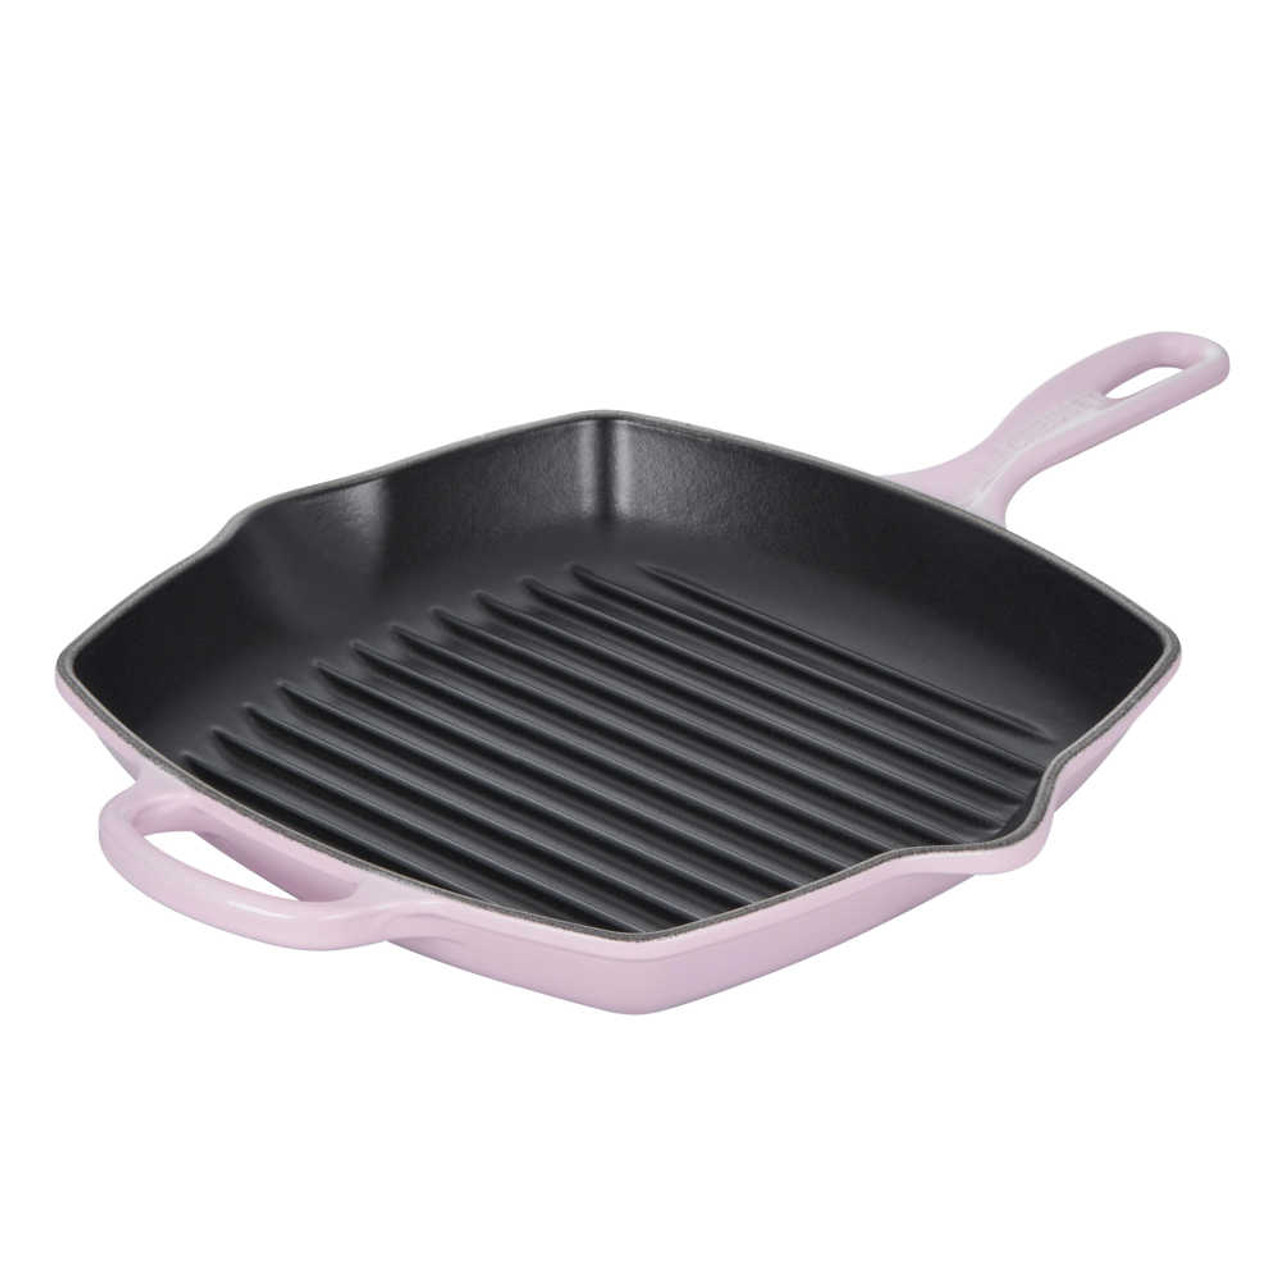 https://cdn11.bigcommerce.com/s-hccytny0od/images/stencil/1280x1280/products/5305/23023/Le_Creuset_Signature_Skillet_Grill_Shallot__74934.1679428947.jpg?c=2?imbypass=on